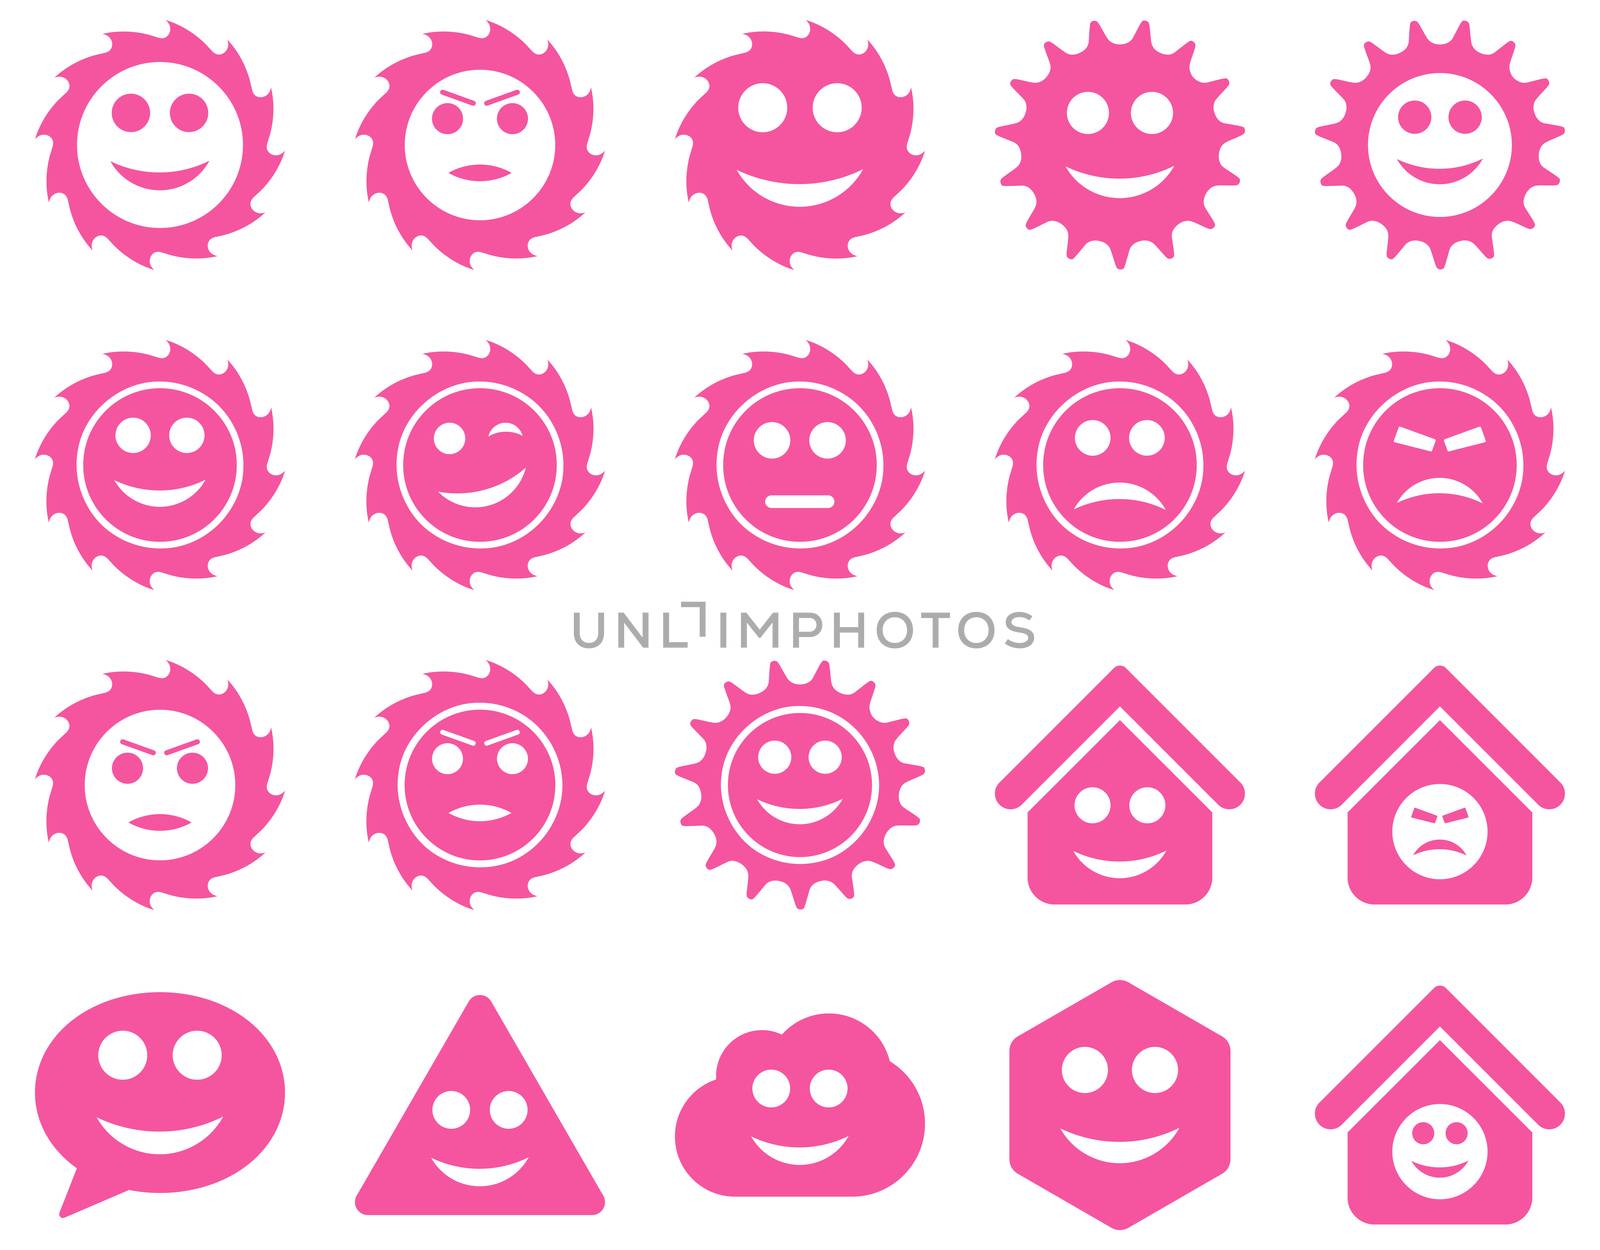 Tools, gears, smiles, emotions icons. Glyph set style is flat images, pink symbols, isolated on a white background.